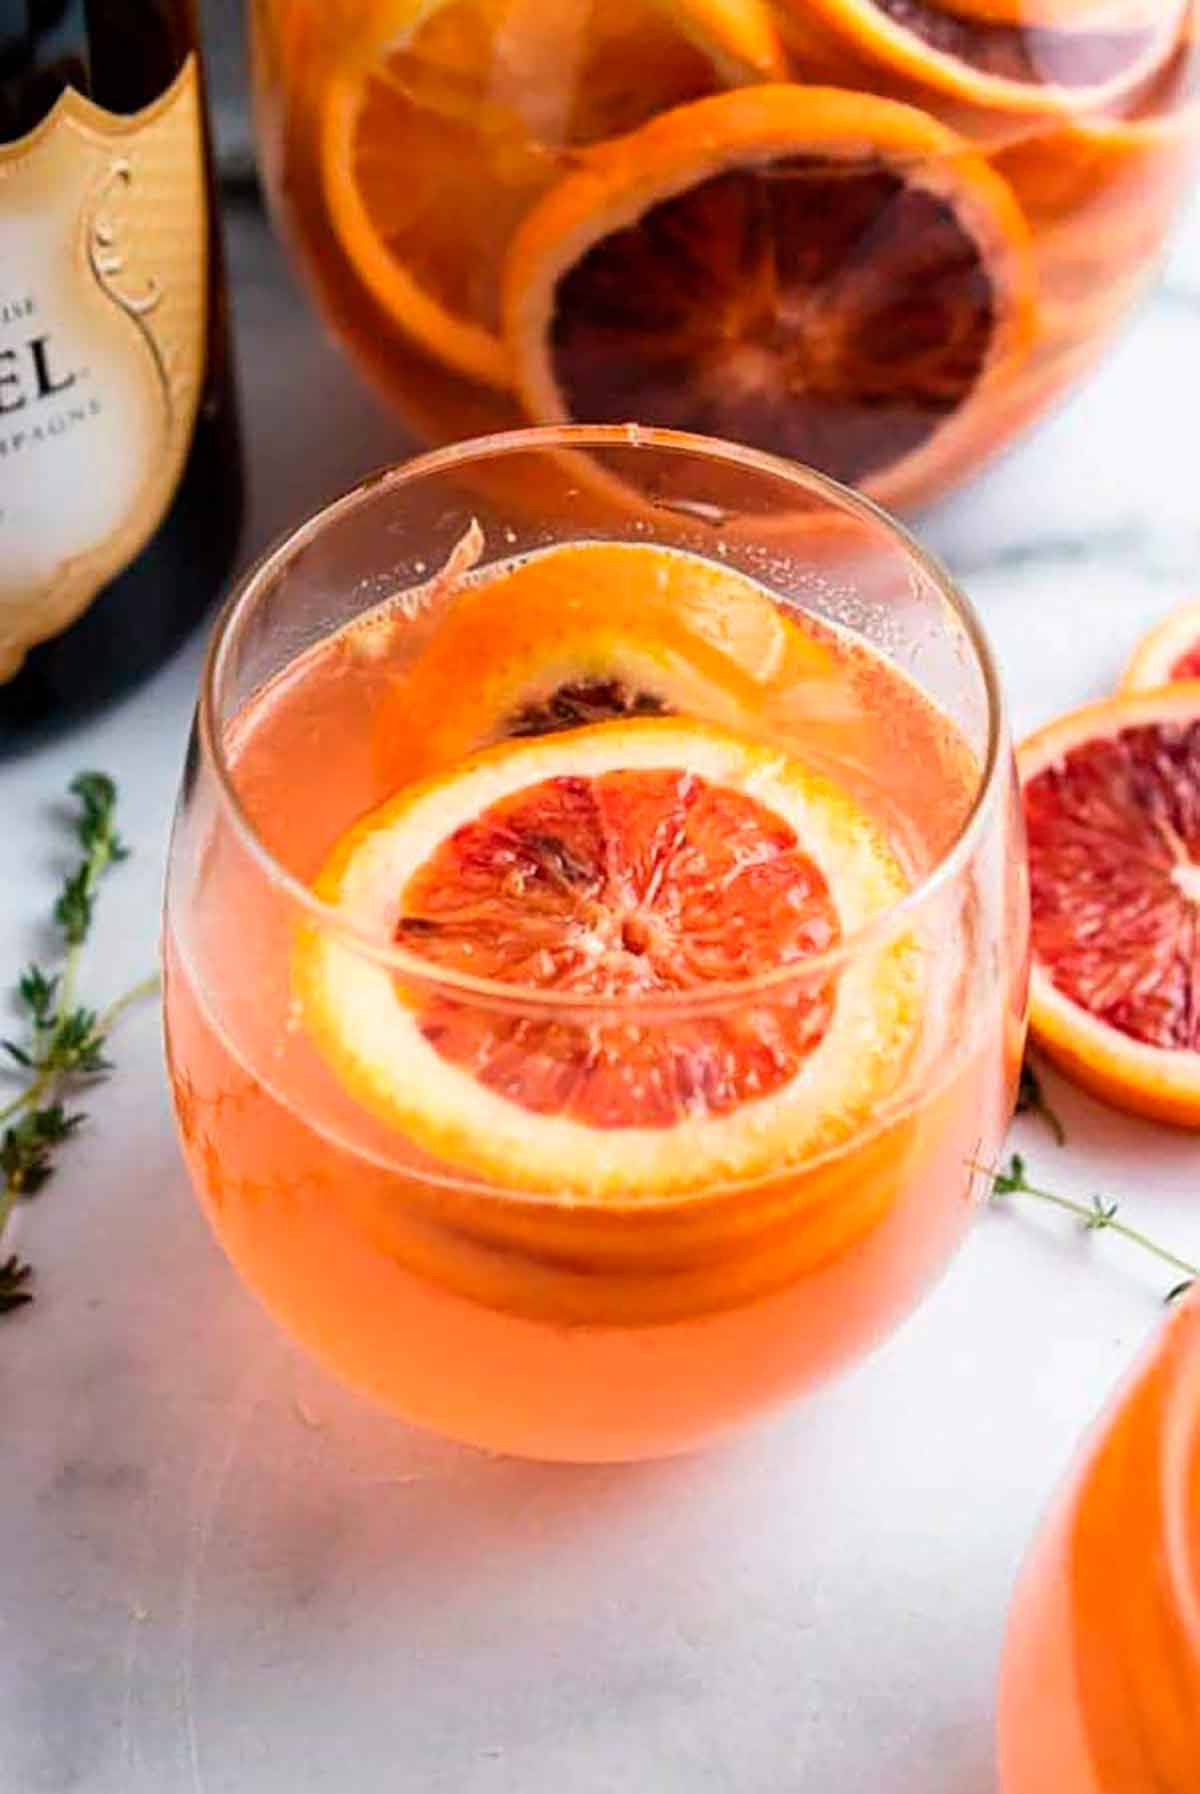 A blood orange champagne cocktail, garnished with an orange slice, beside a few stray orange slices on a table.